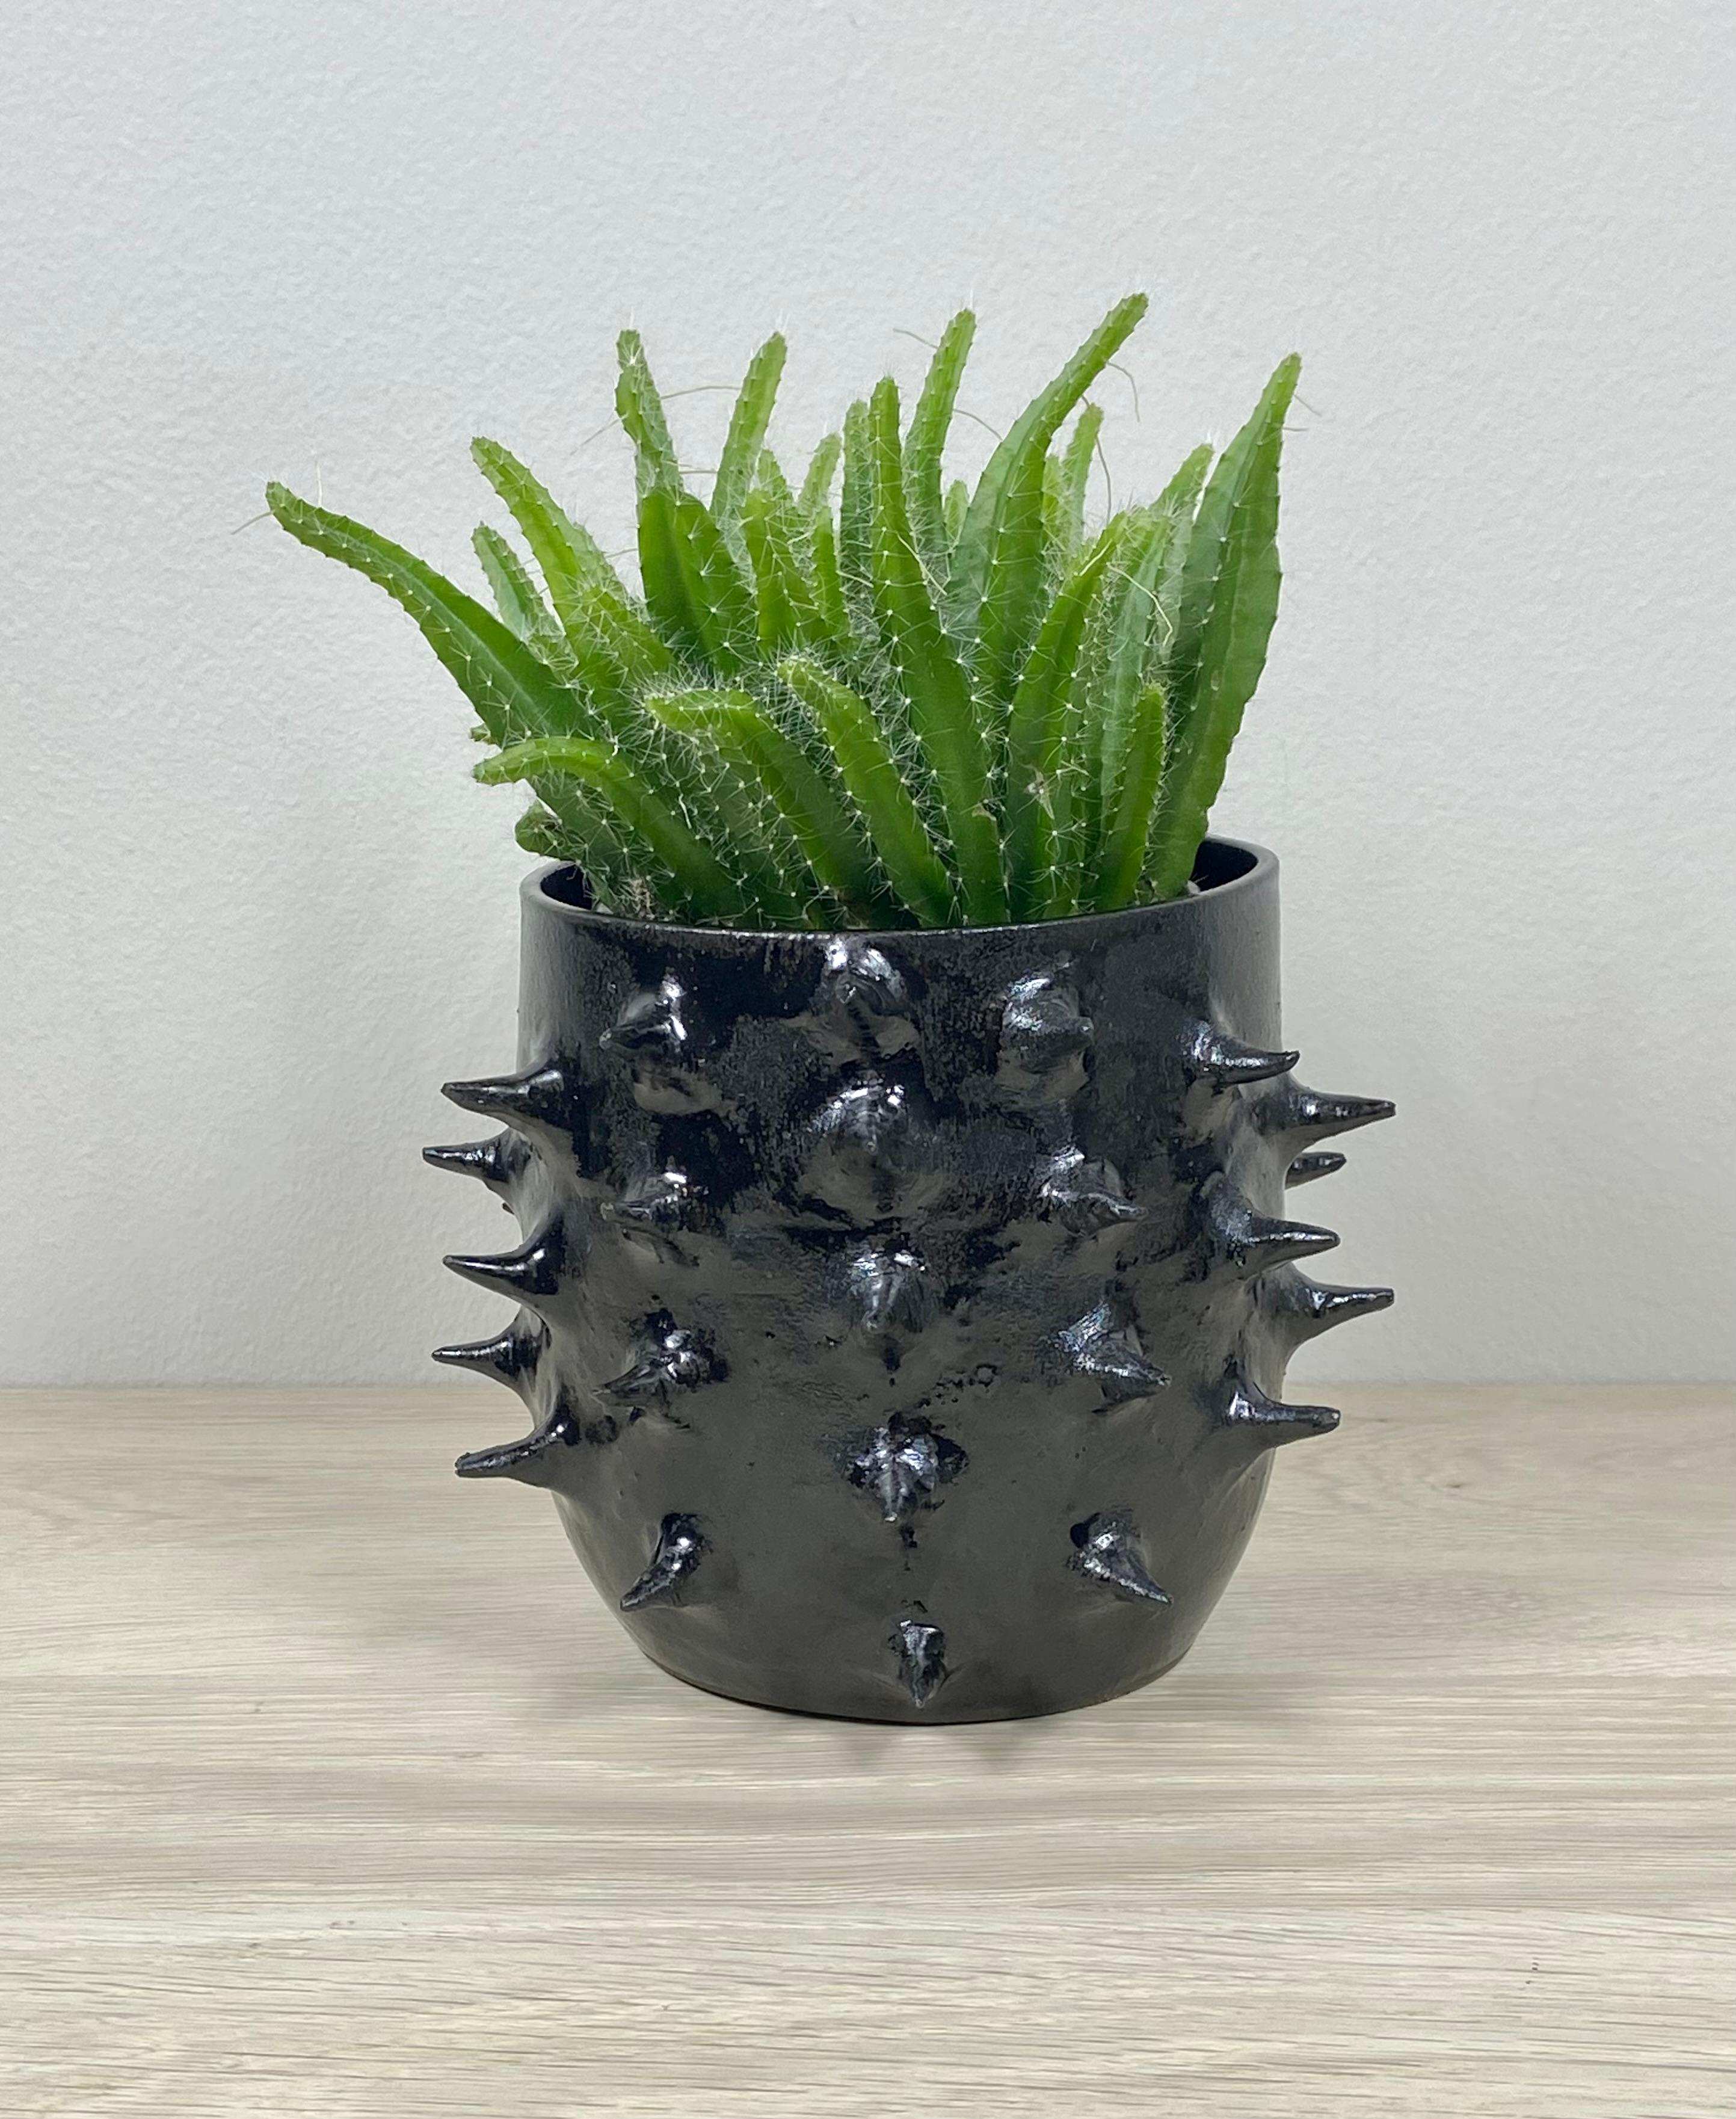 A striking hand-carved ceramic planter with spikes in a gunmetal metallic glaze. Each spike is hand carved and hand applied to the planter/bowl. Elevate your plants with this interesting piece. The spikes occupy about half of the surface of the